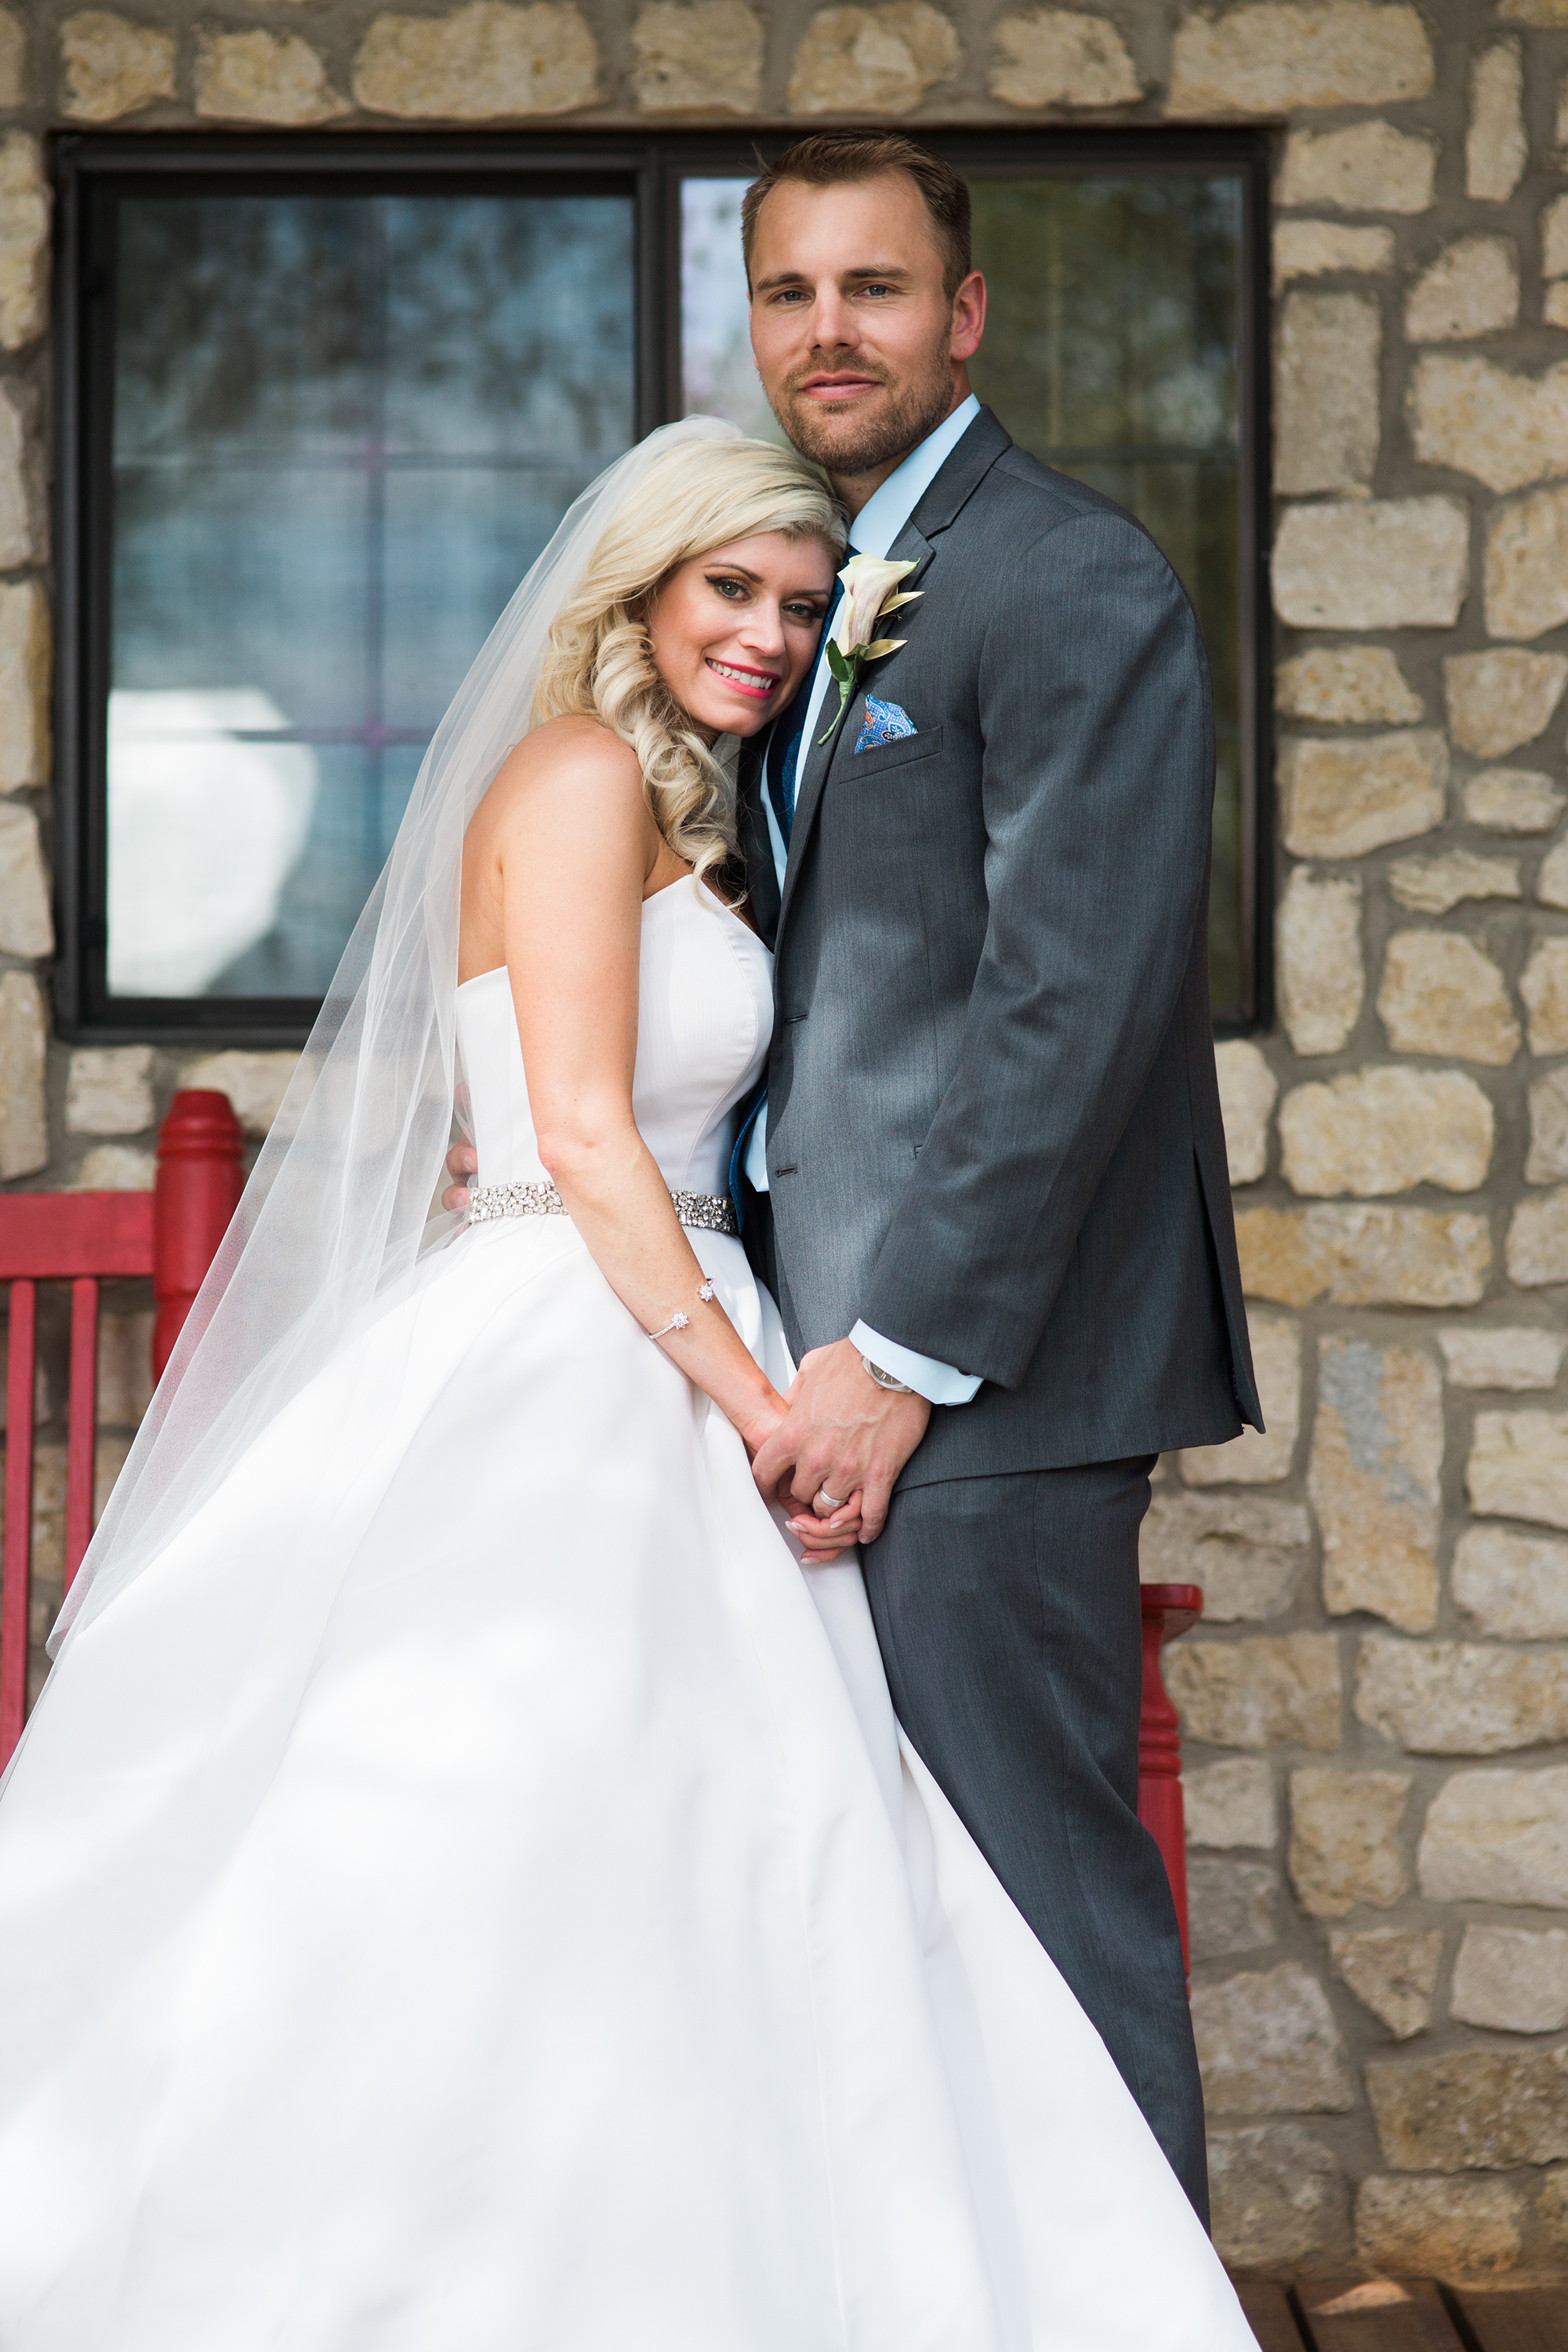 ‘Married At First Sight’: Meet Season 7’s Couples